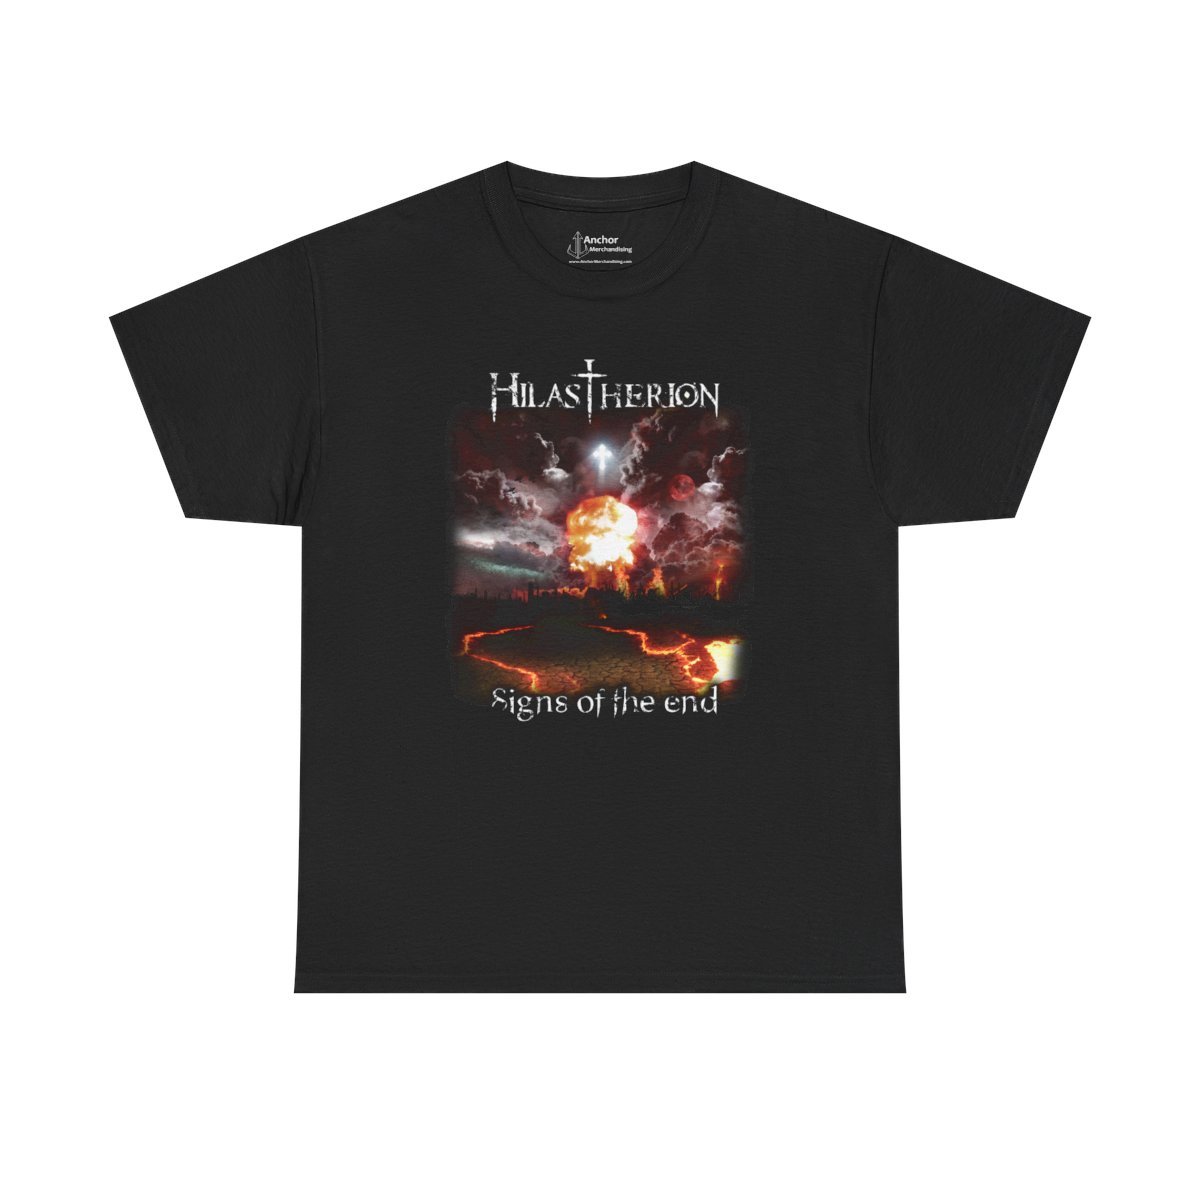 Hilastherion – Signs of the End Short Sleeve Tshirt